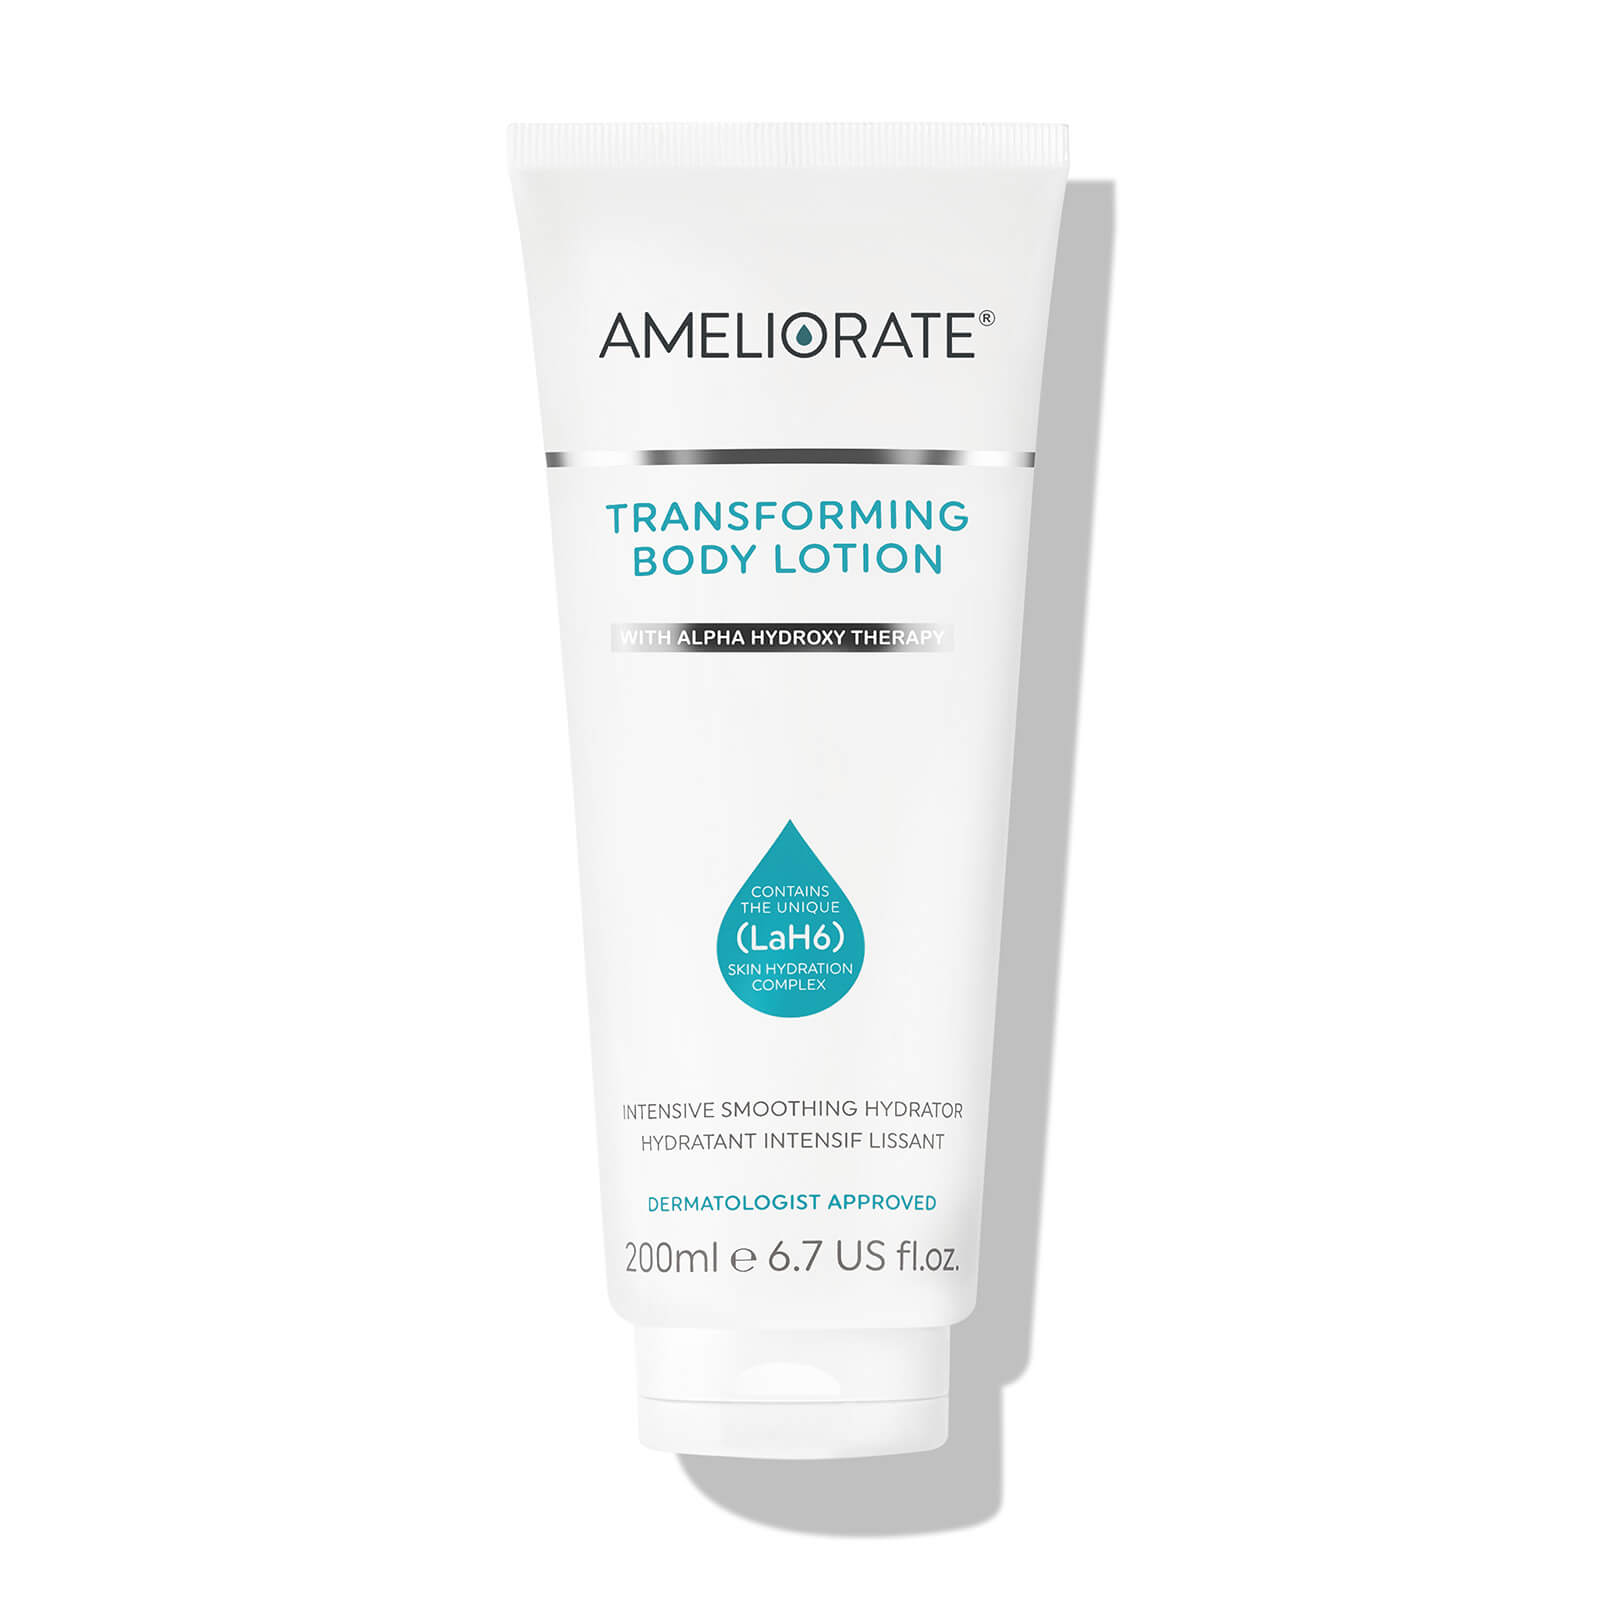 AMELIORATE Transforming Body Lotion 200ml (Fragrance Free)